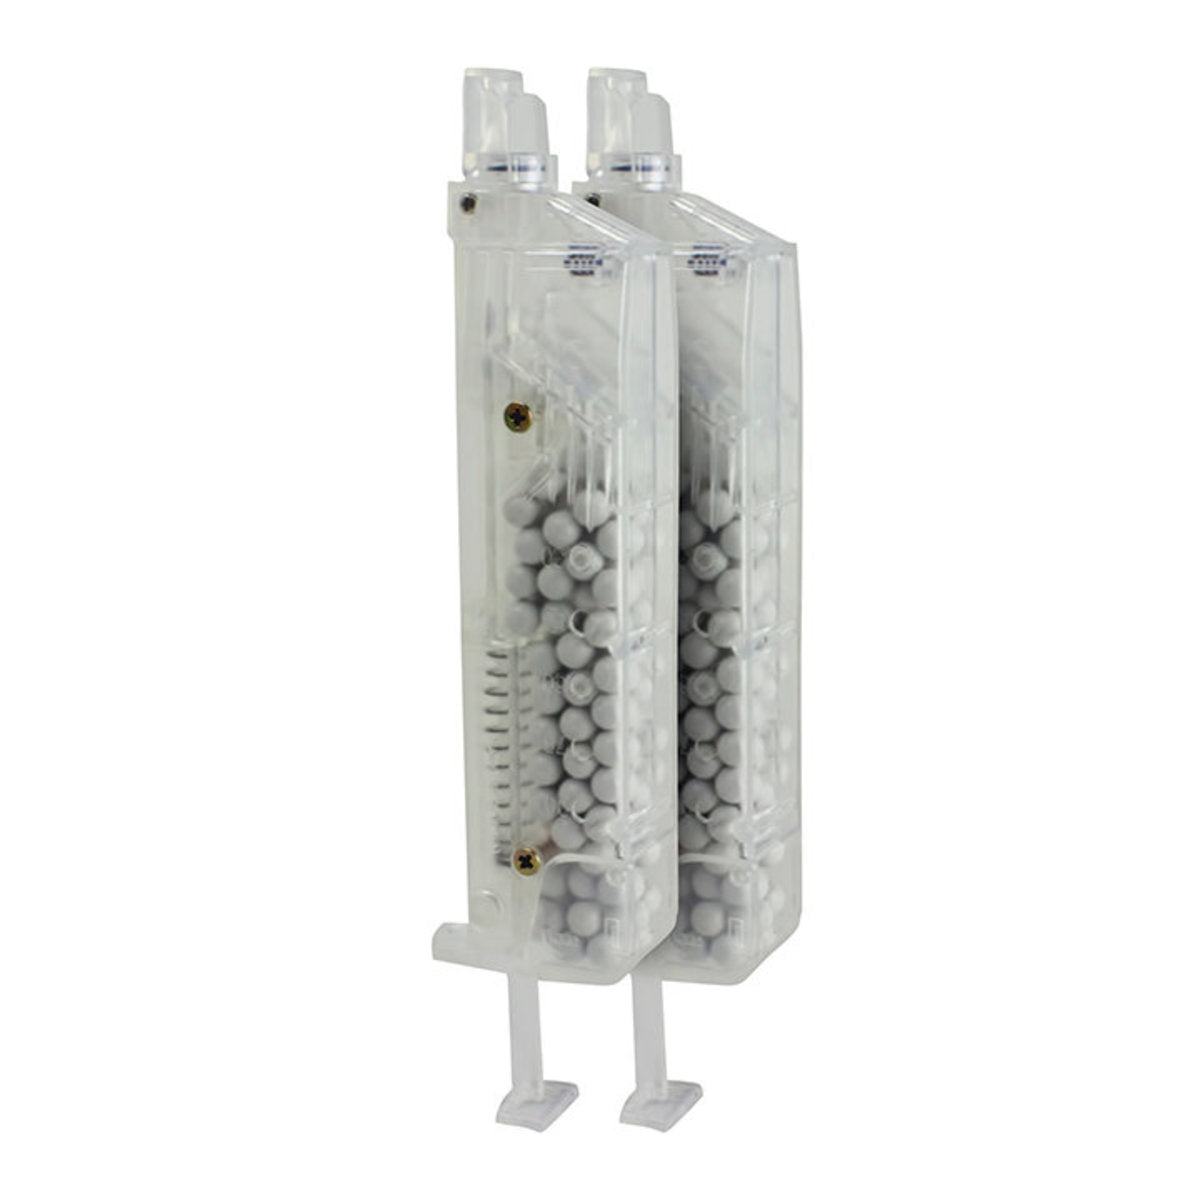 120rd Airsoft BB Speed Loader - Clear (2 Pack)